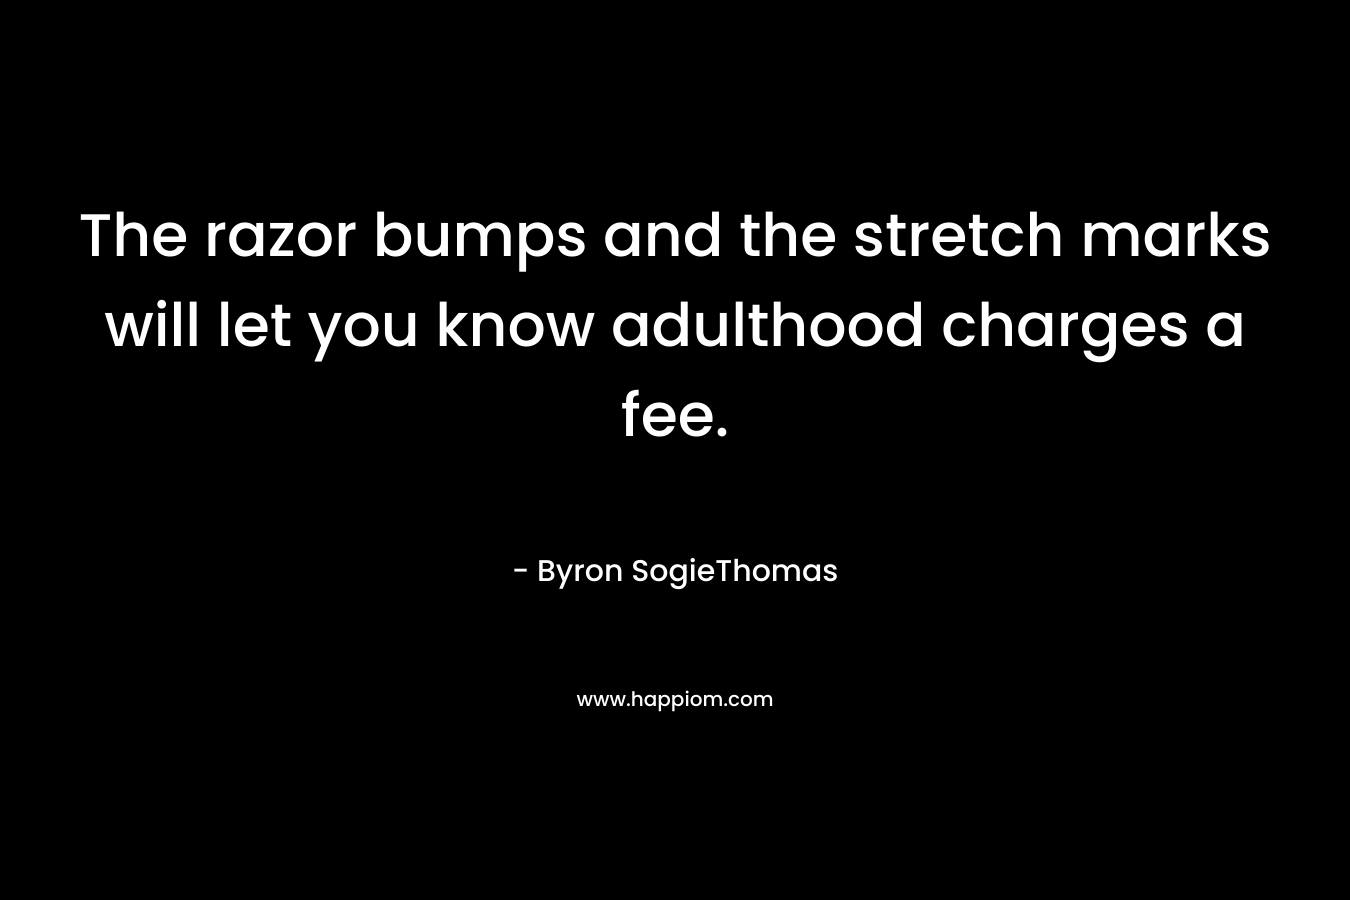 The razor bumps and the stretch marks will let you know adulthood charges a fee. – Byron SogieThomas